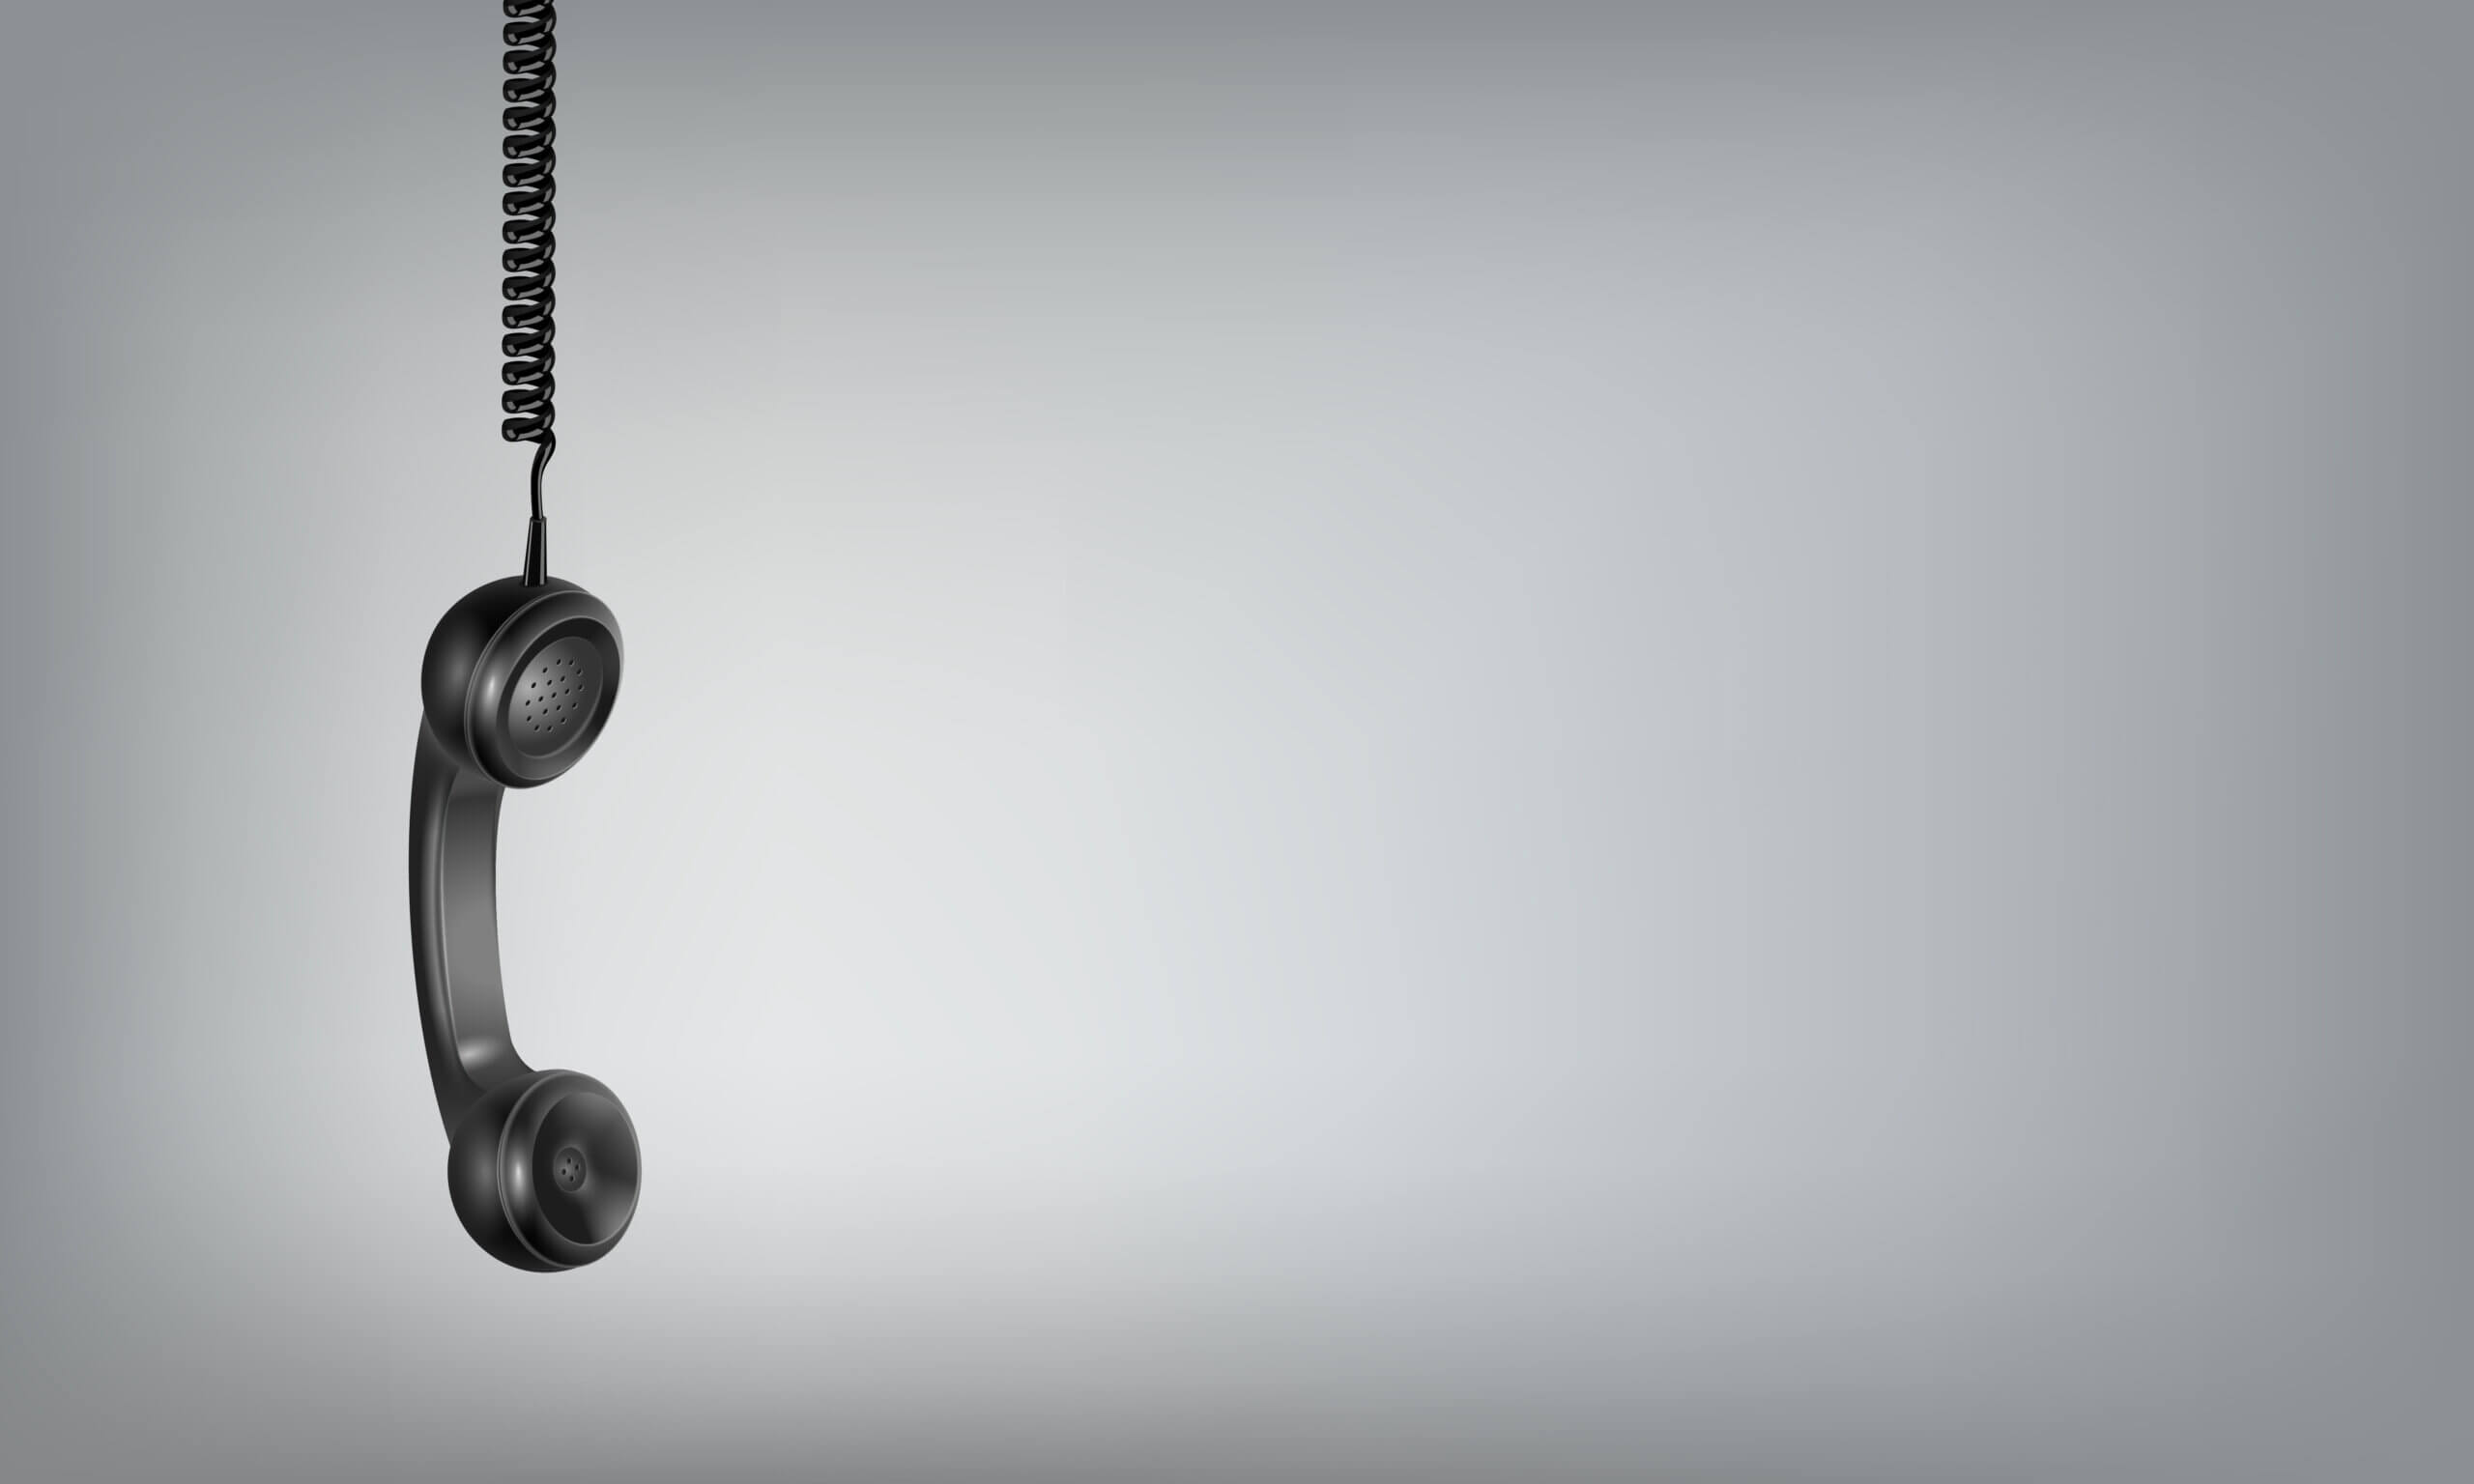 Black telephone in a gray background